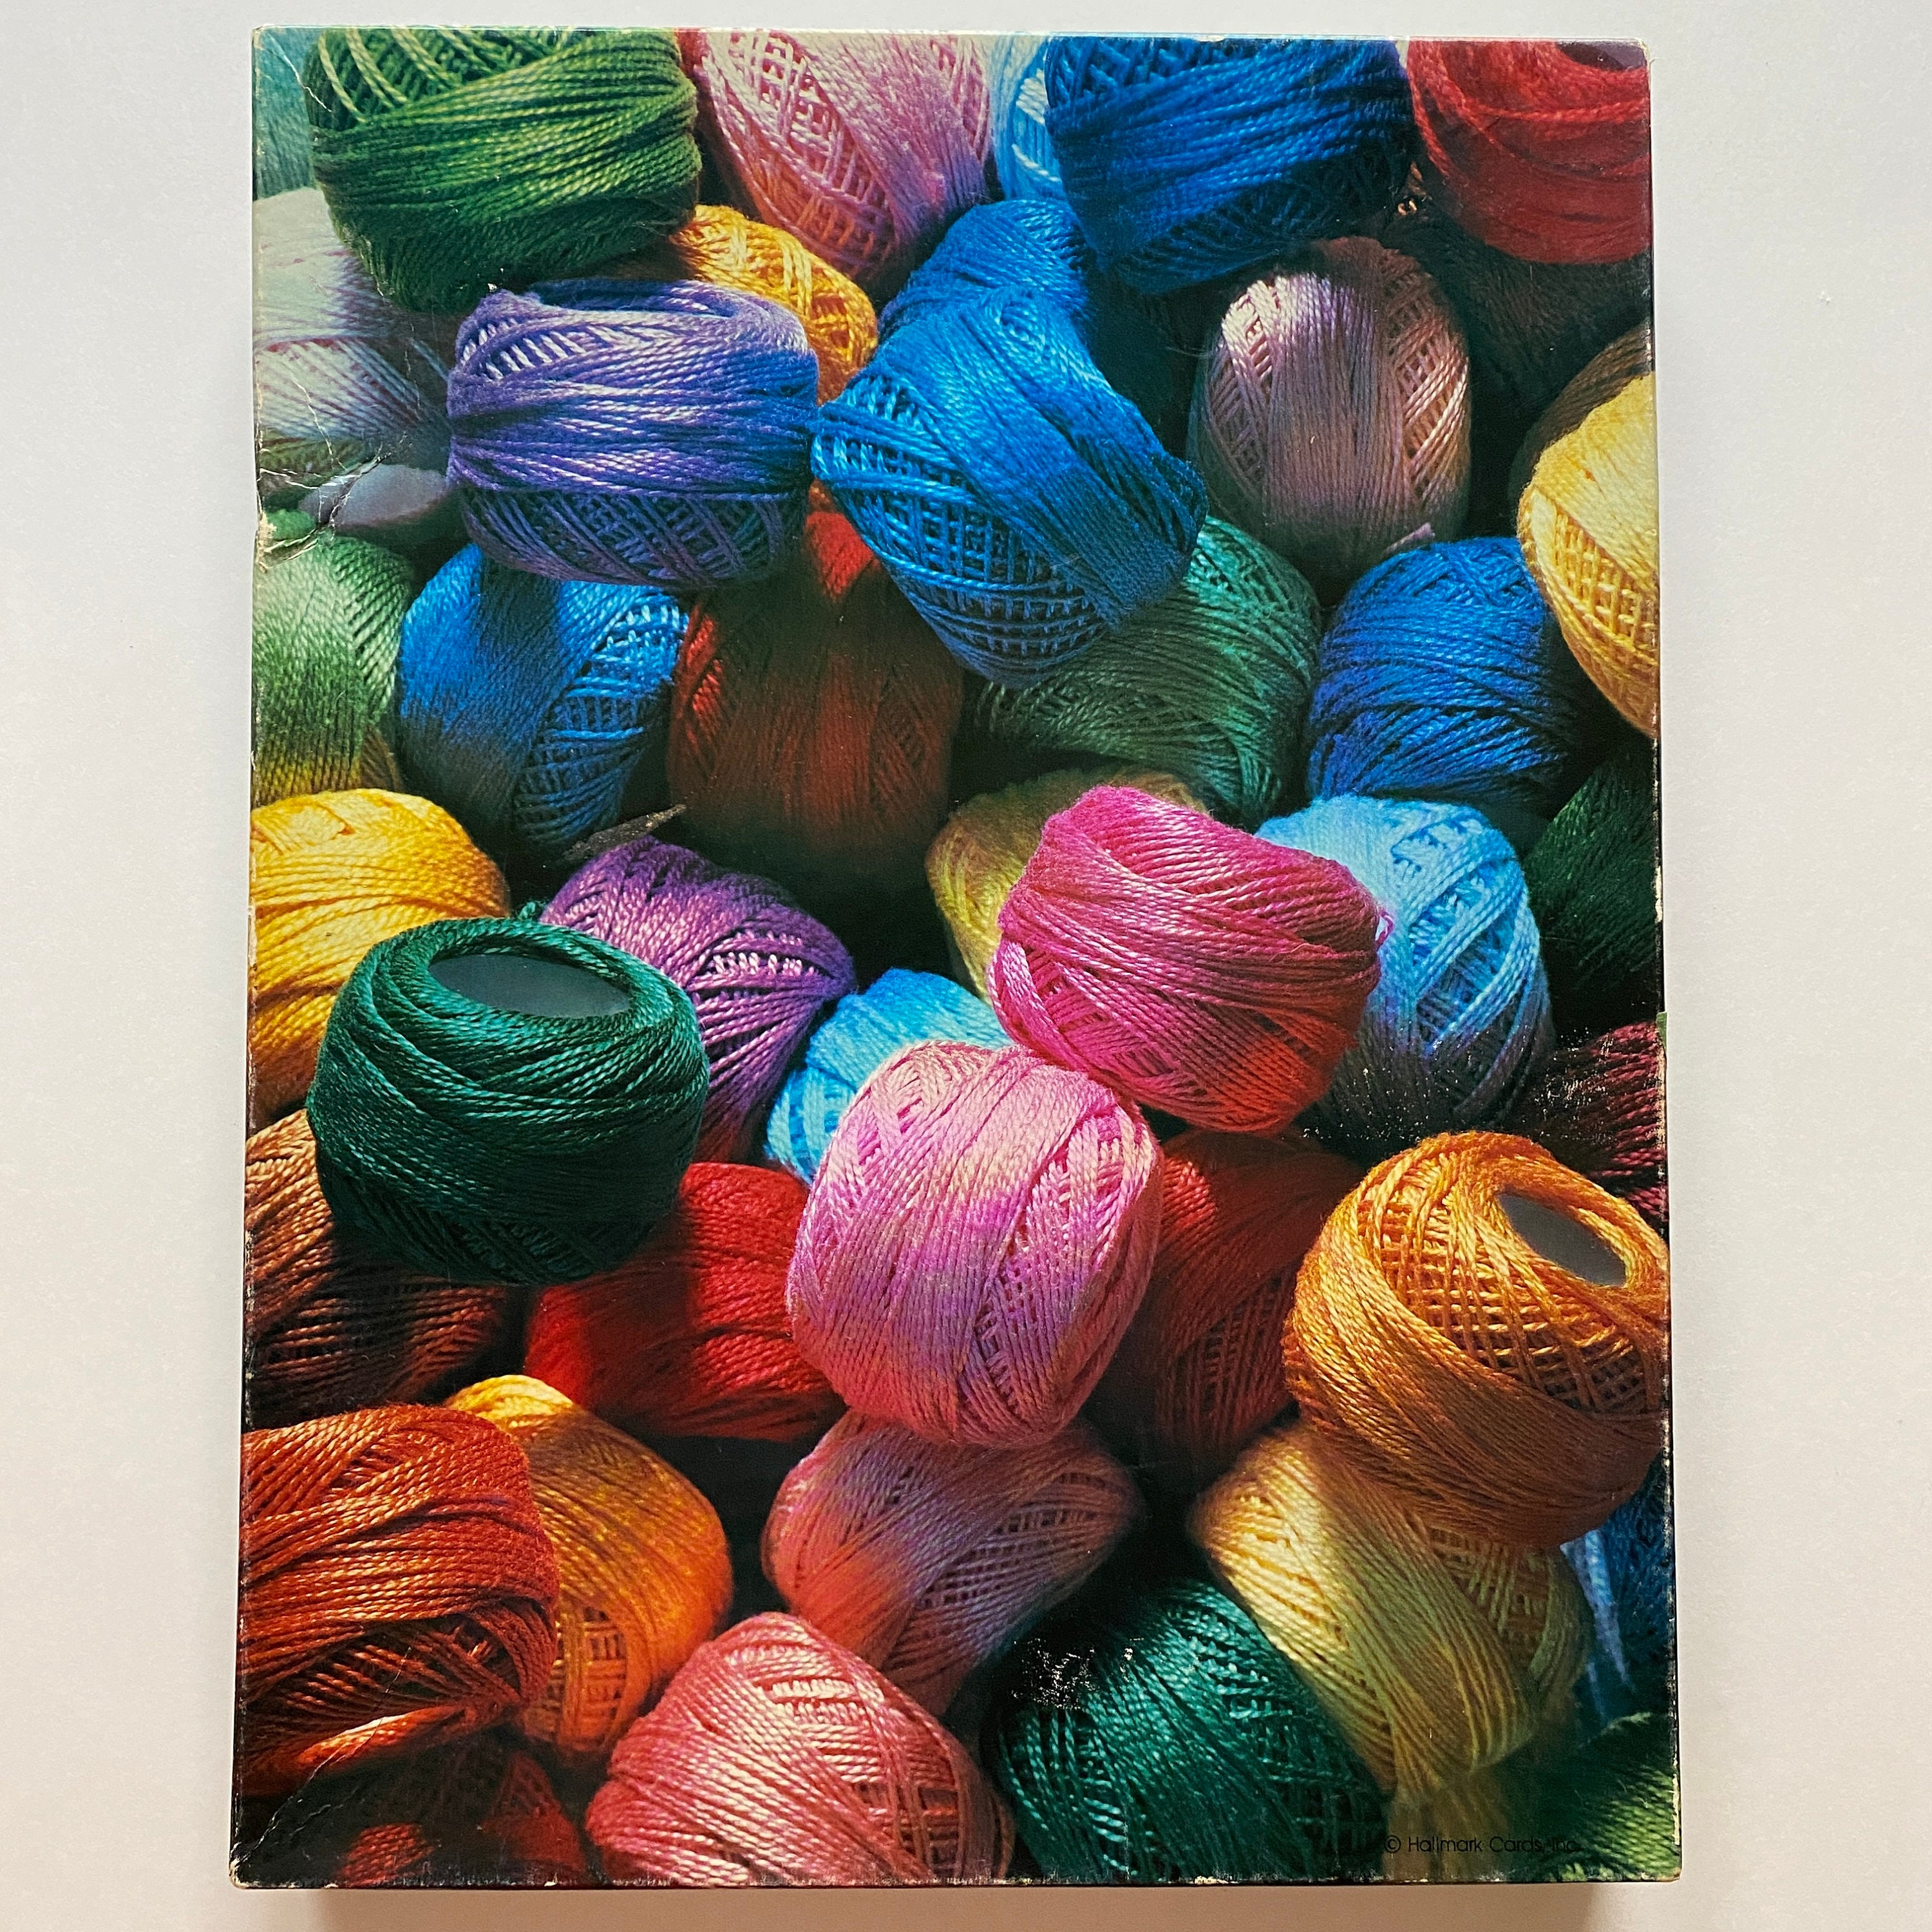 Yarn Jigsaw Puzzles for Sale